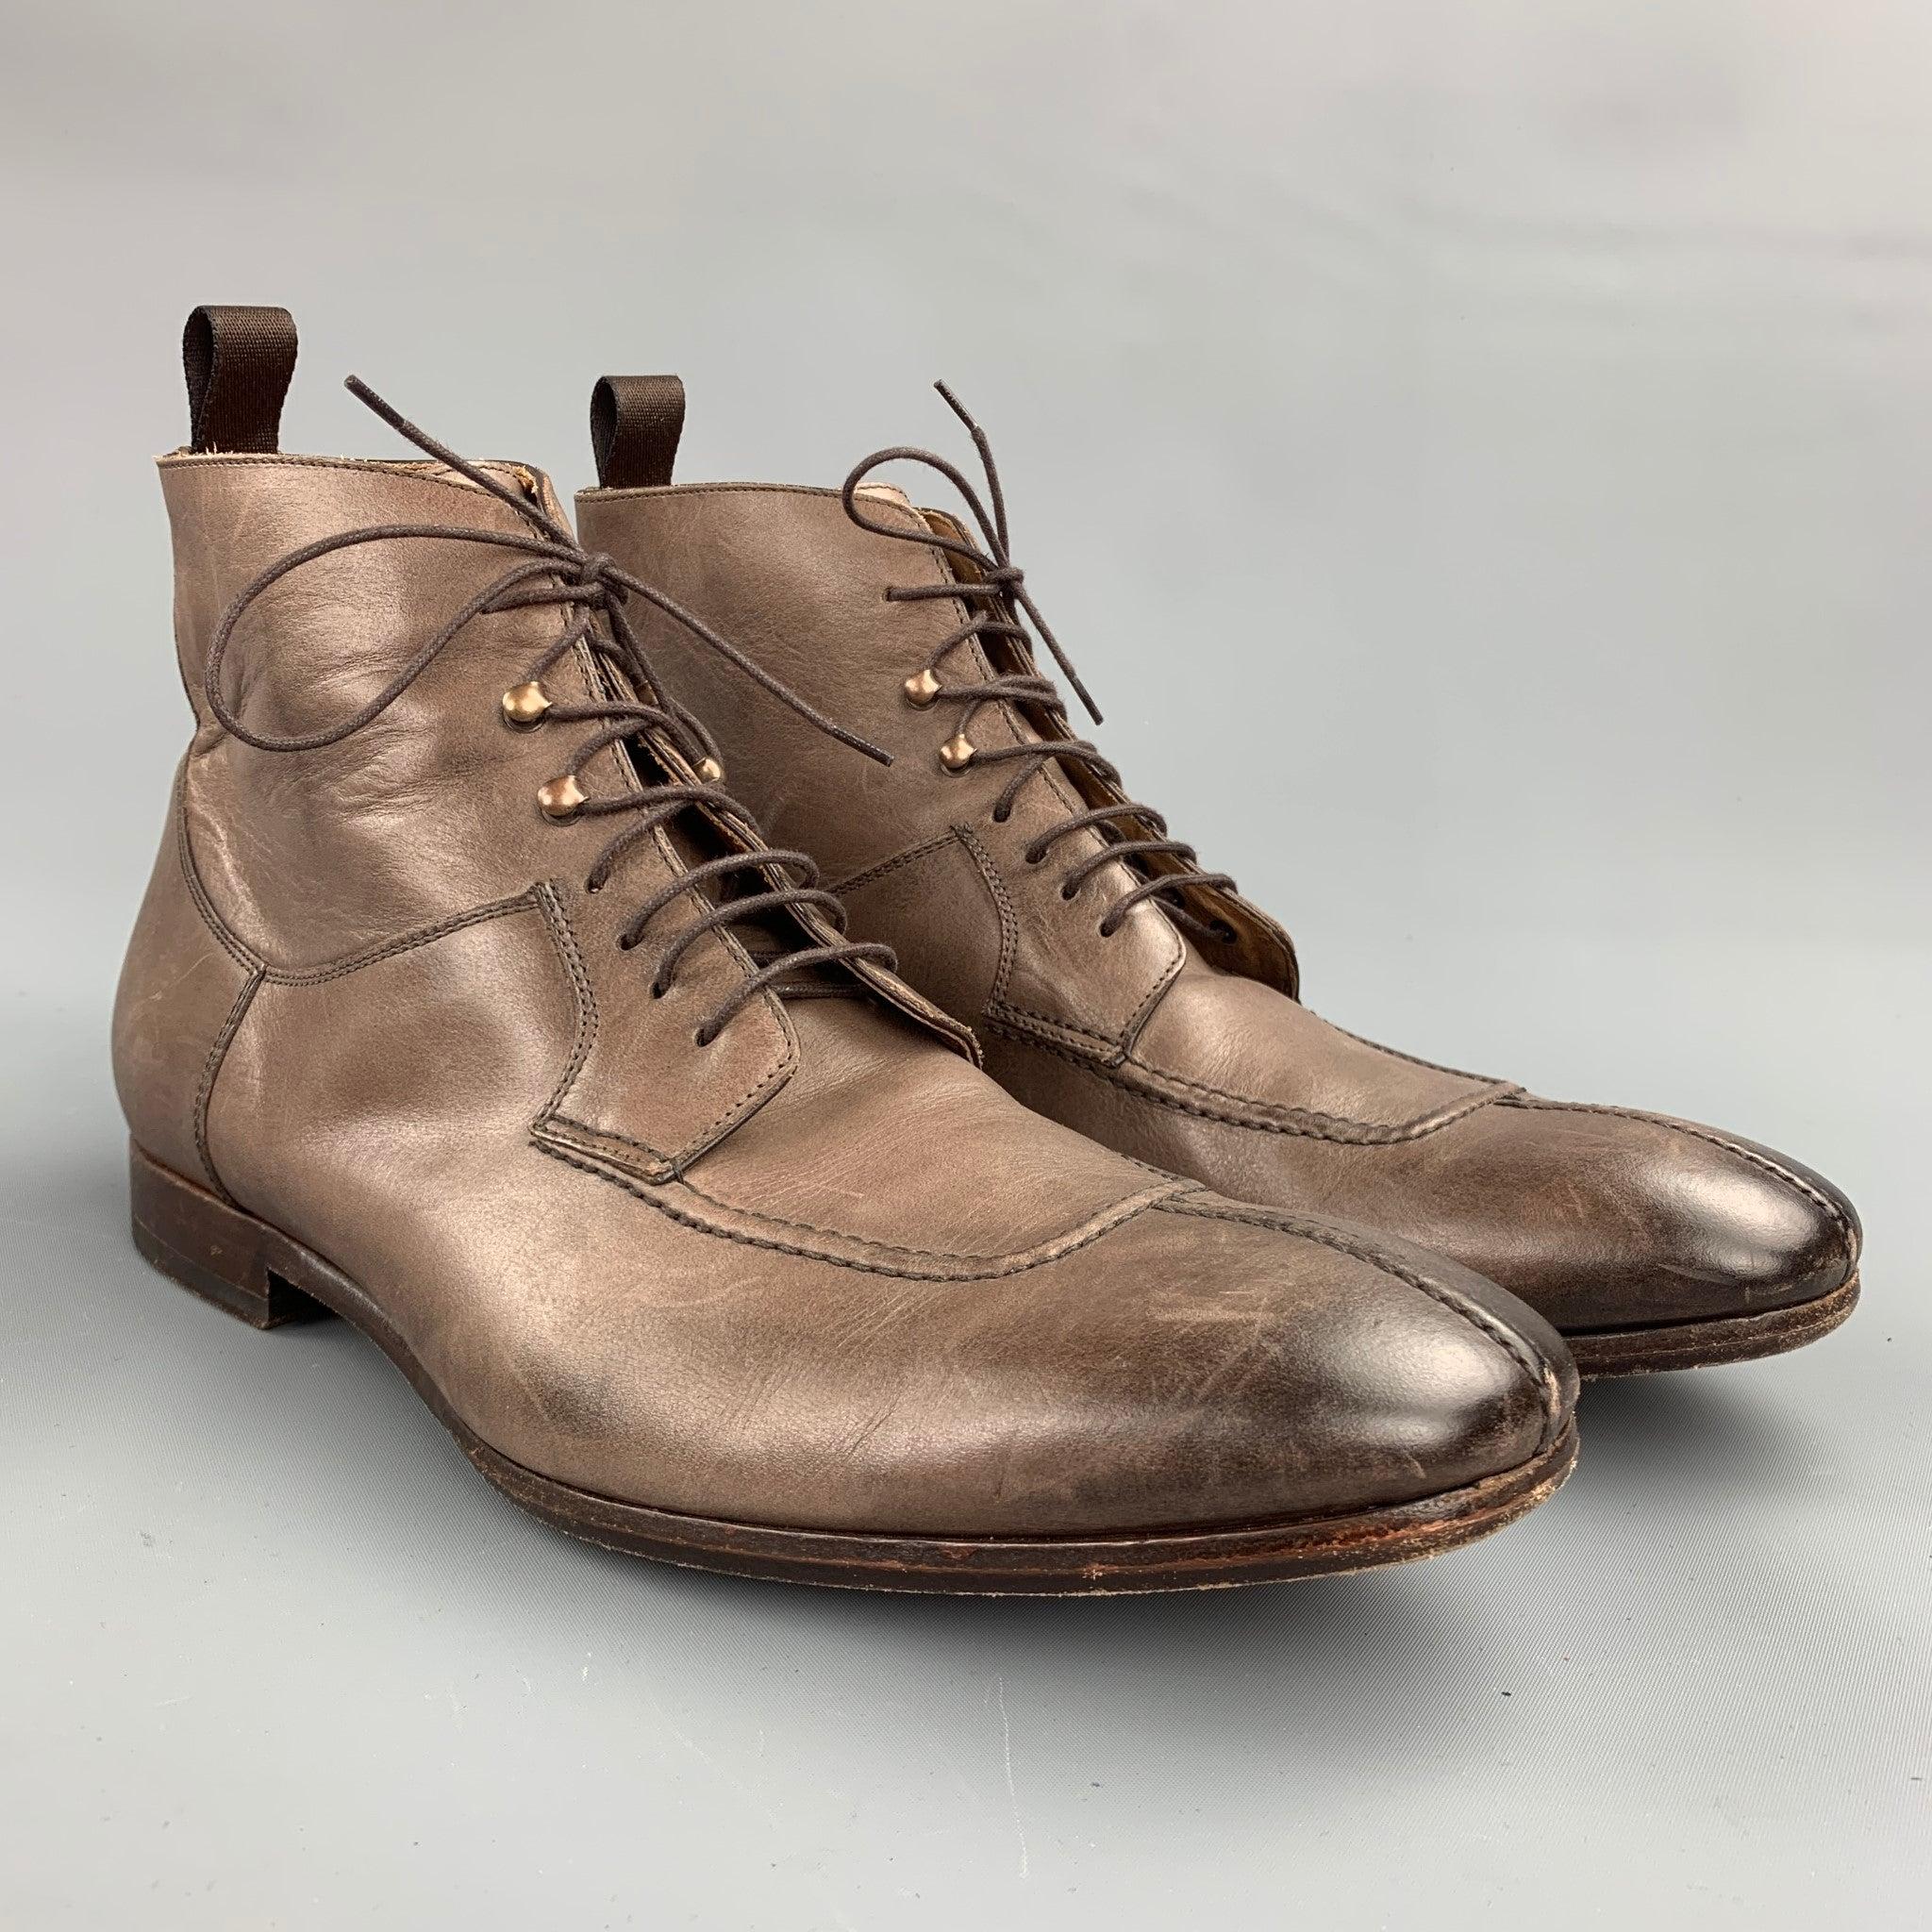 PAUL SMITH ankle boots comes in a brown distressed leather featuring a cap toe, top stitching, wooden sole, and a lace up closure. Minor wear. Made in Italy.Good Pre-Owned Condition. 

Marked:   EU 43.5 

Measurements: 
  Width: 4 inches 
Length: 12